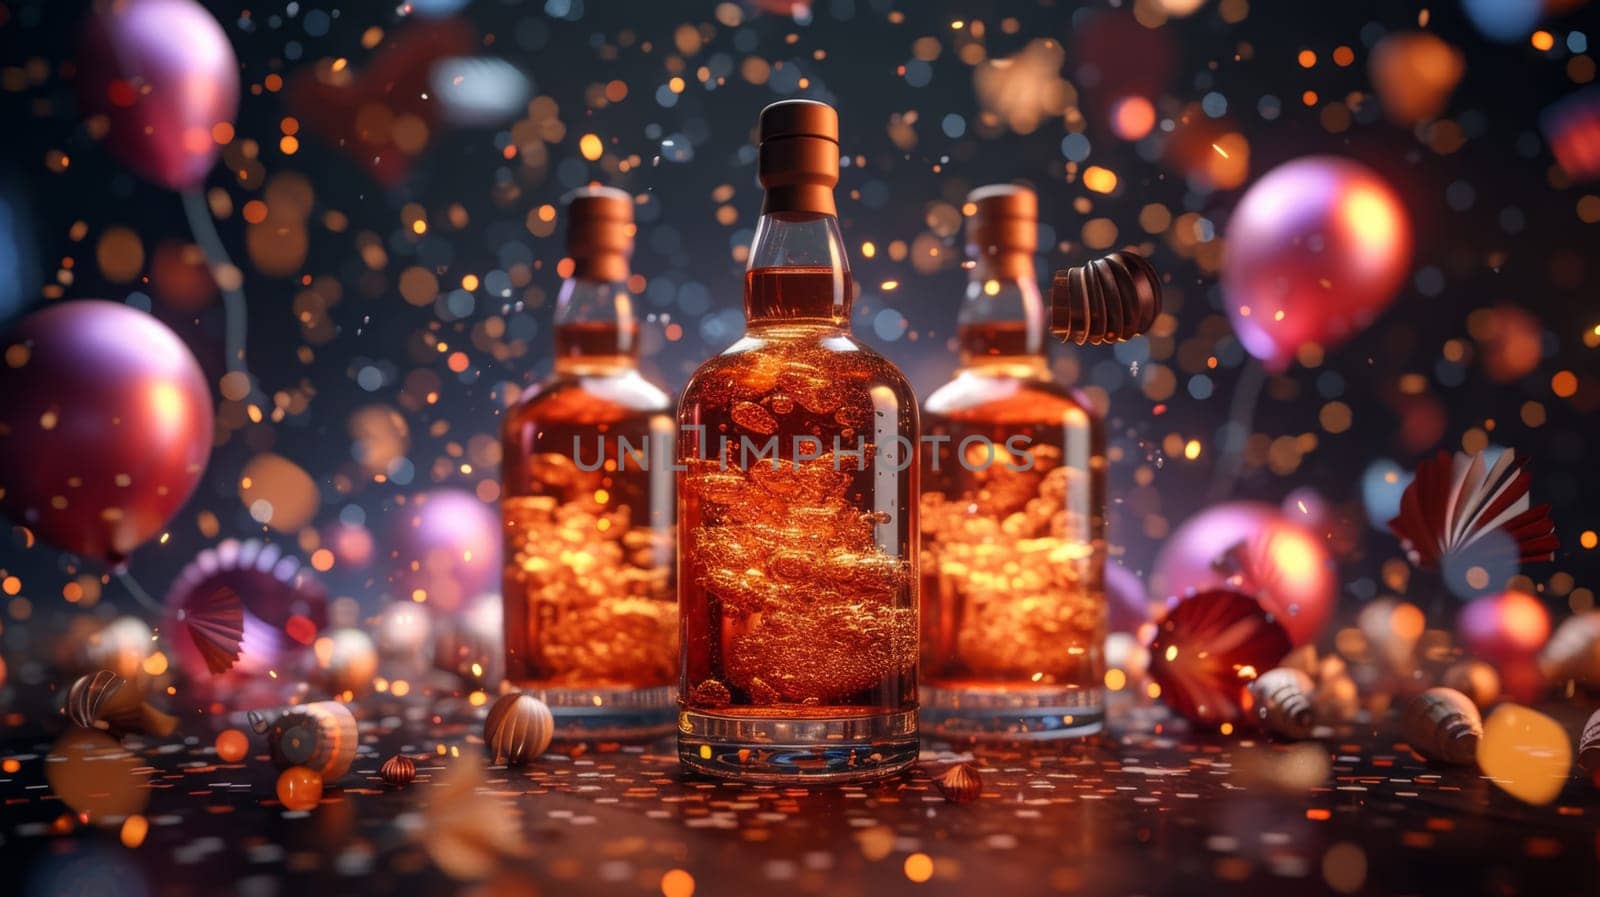 Three bottles of whiskey with an empty label on a festive background with balloons and confetti.